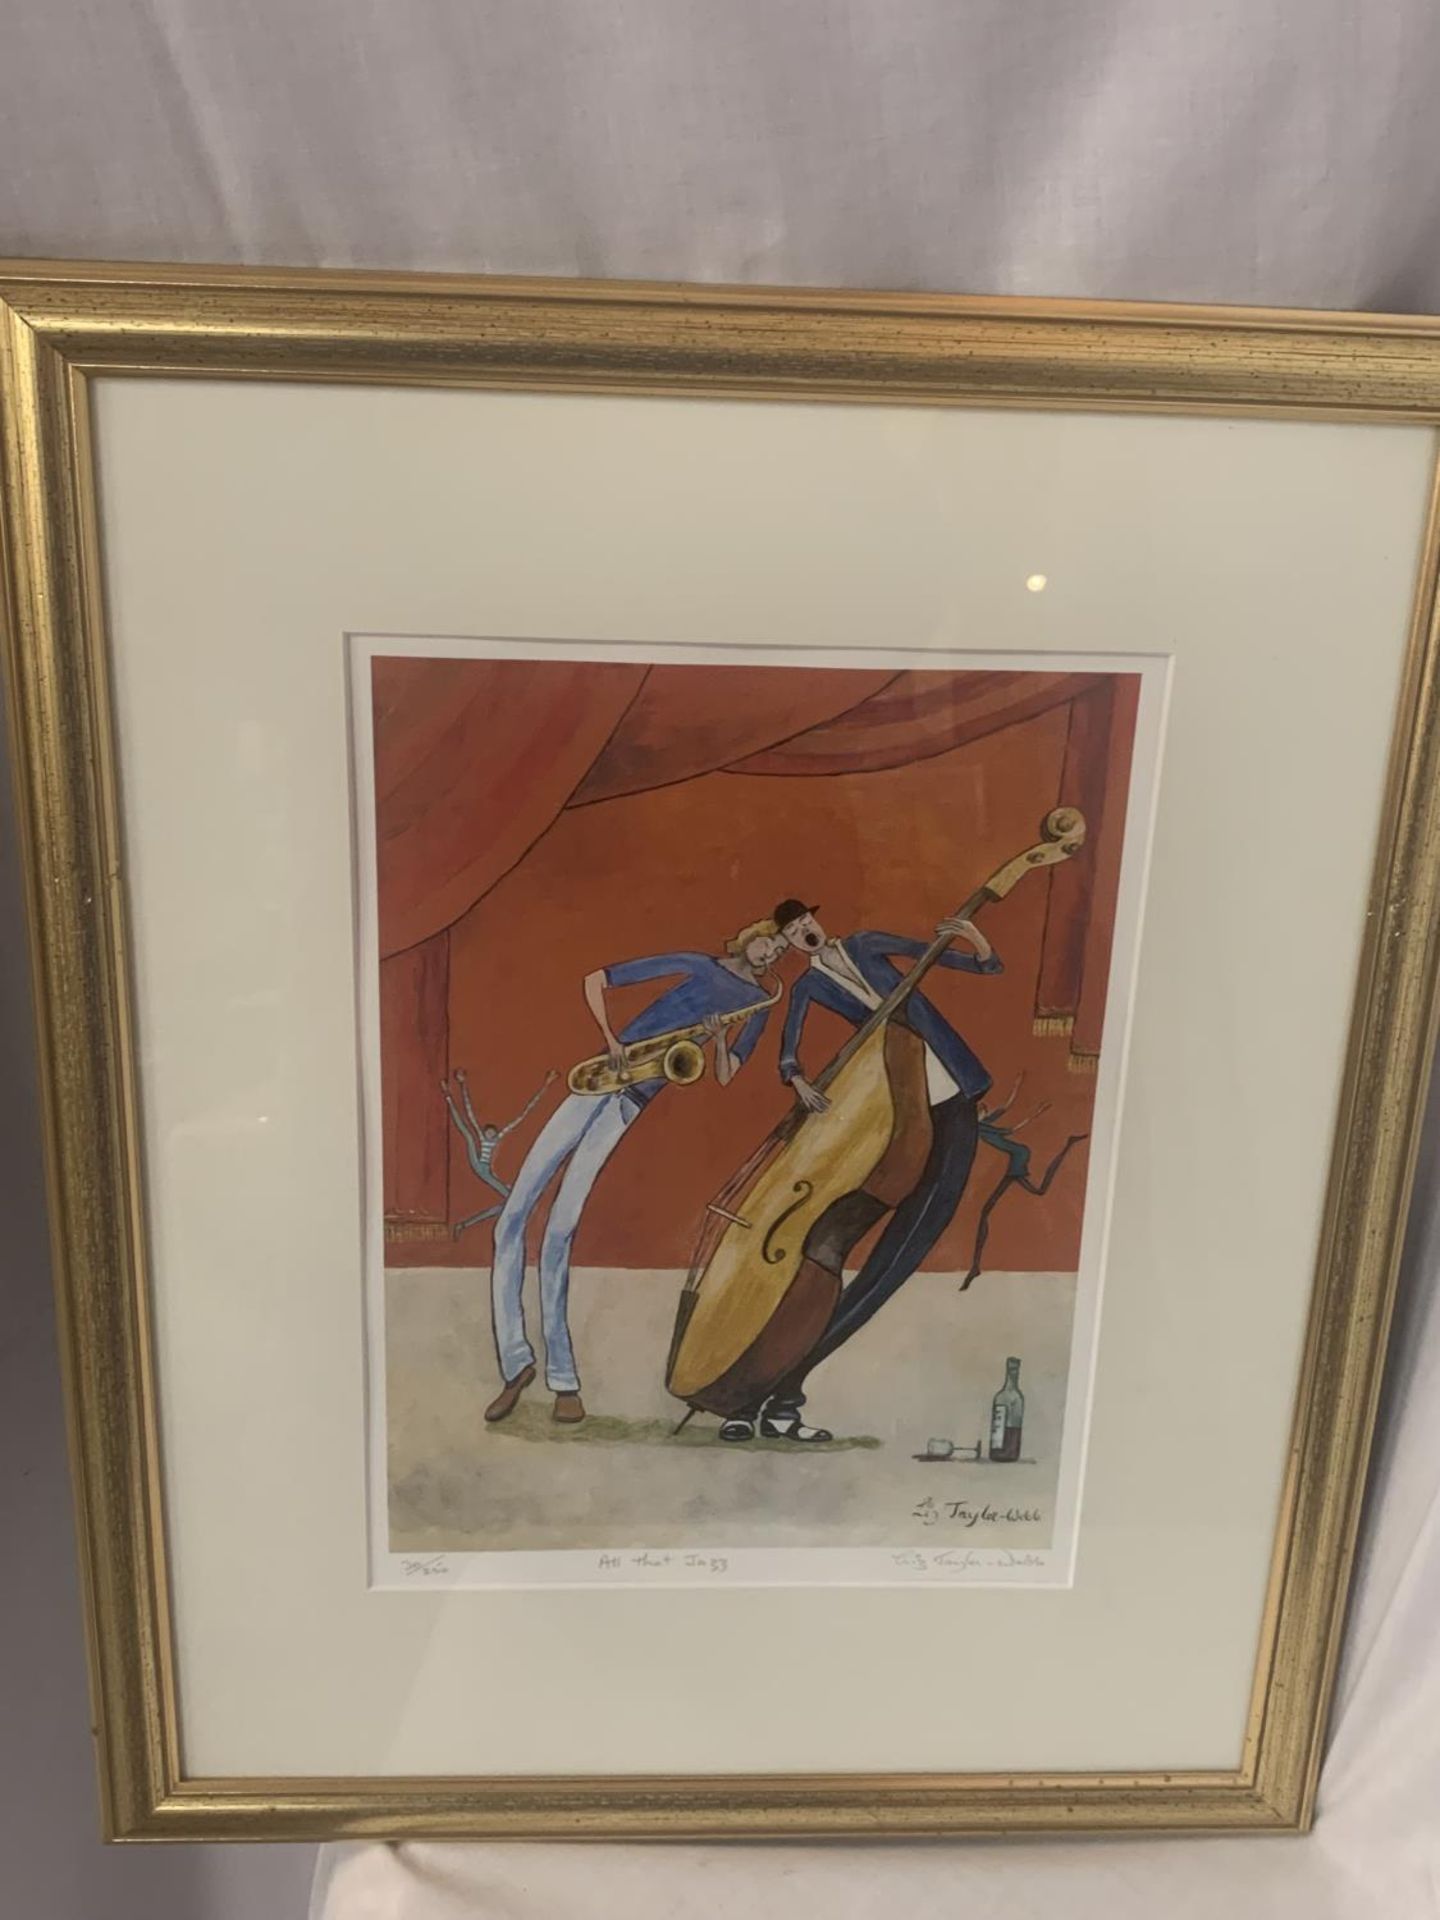 A GILT FRAMED LIMITED EDITION LIZ TAYLOR WEBB PICTURE 'ALL THAT JAZZ' PENCIL SIGNED TO LOWER RIGHT